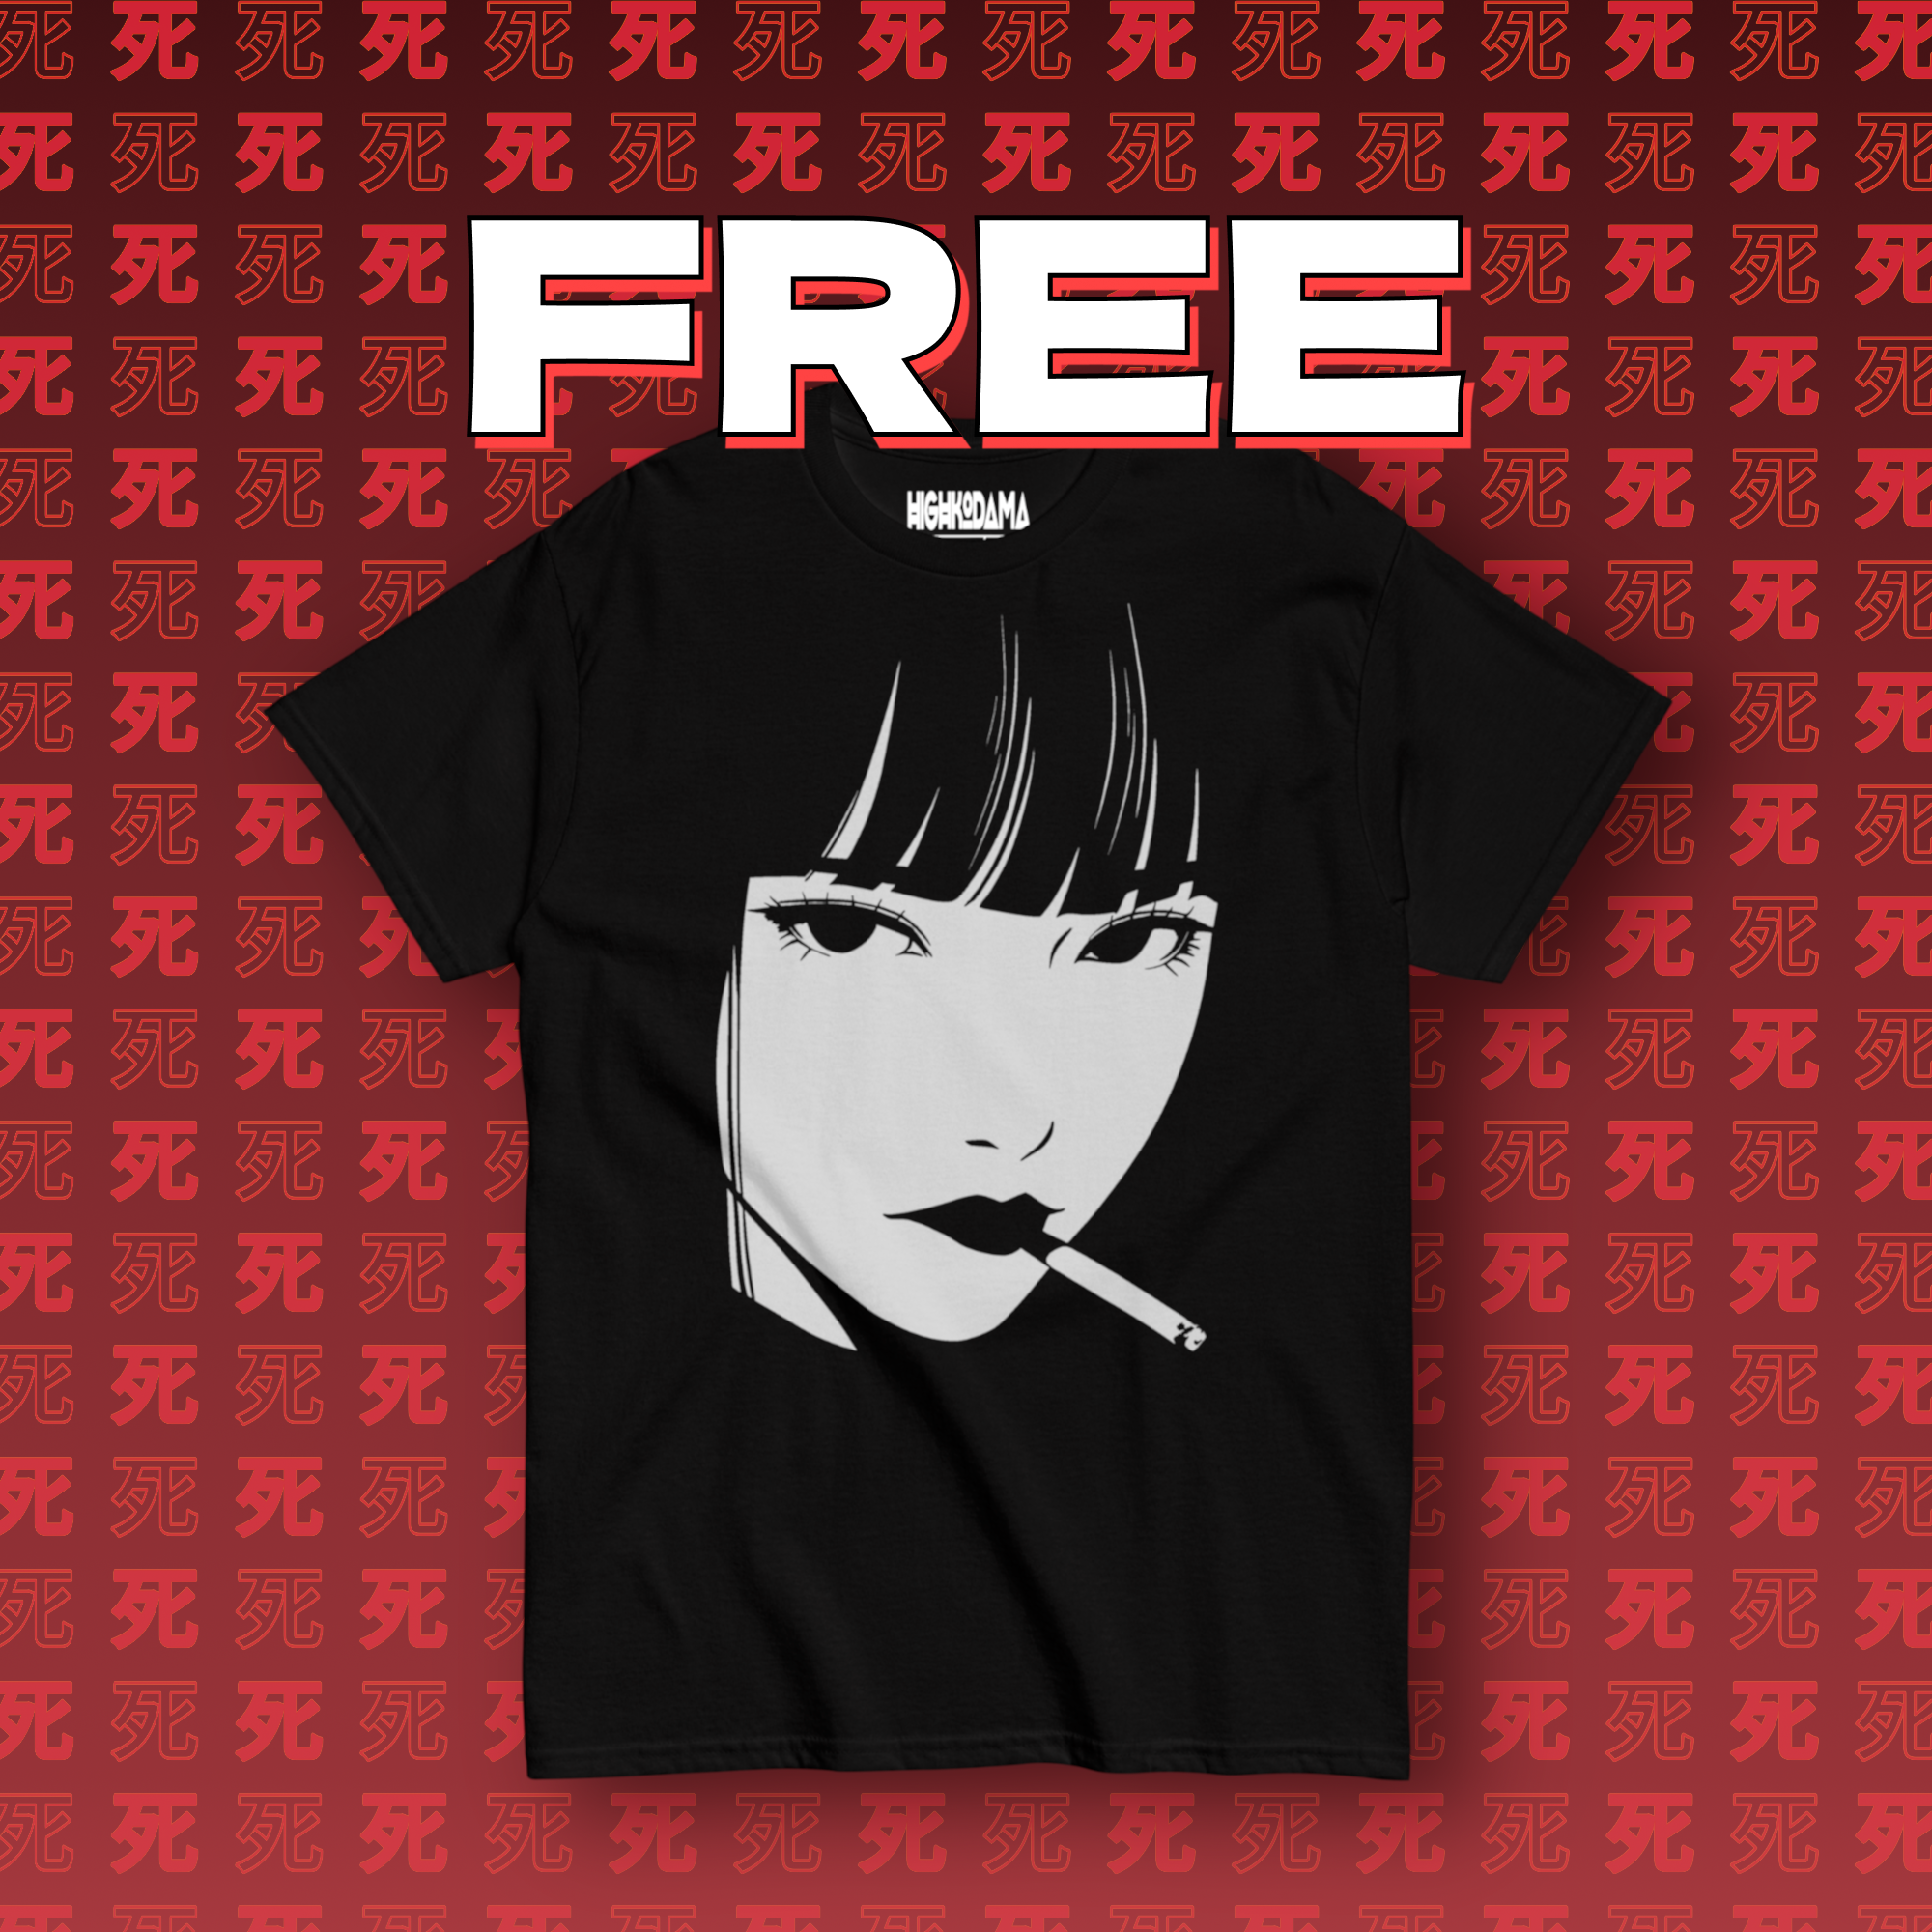 Free anime shirt "Dead and Gone" featuring a stylish black and white illustration of a woman with a cigarette, displayed on a red background with repeating patterns